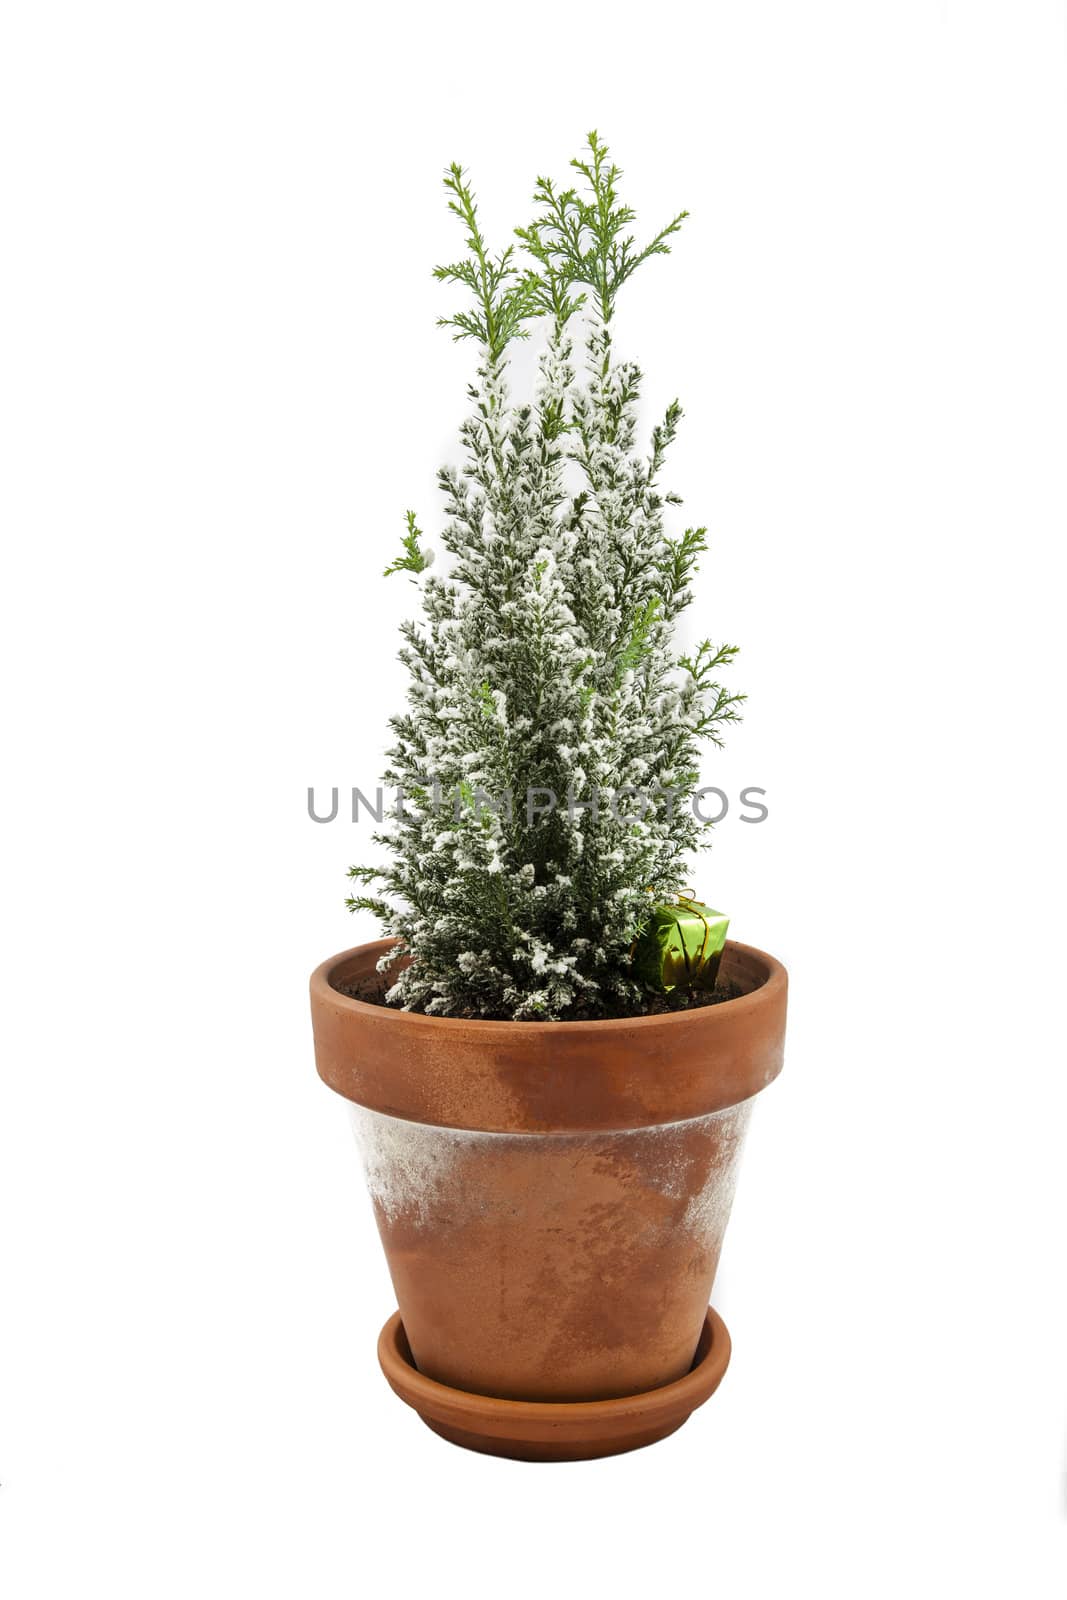 A baby Christmas Tree in a terracotta pot over a white backdrop